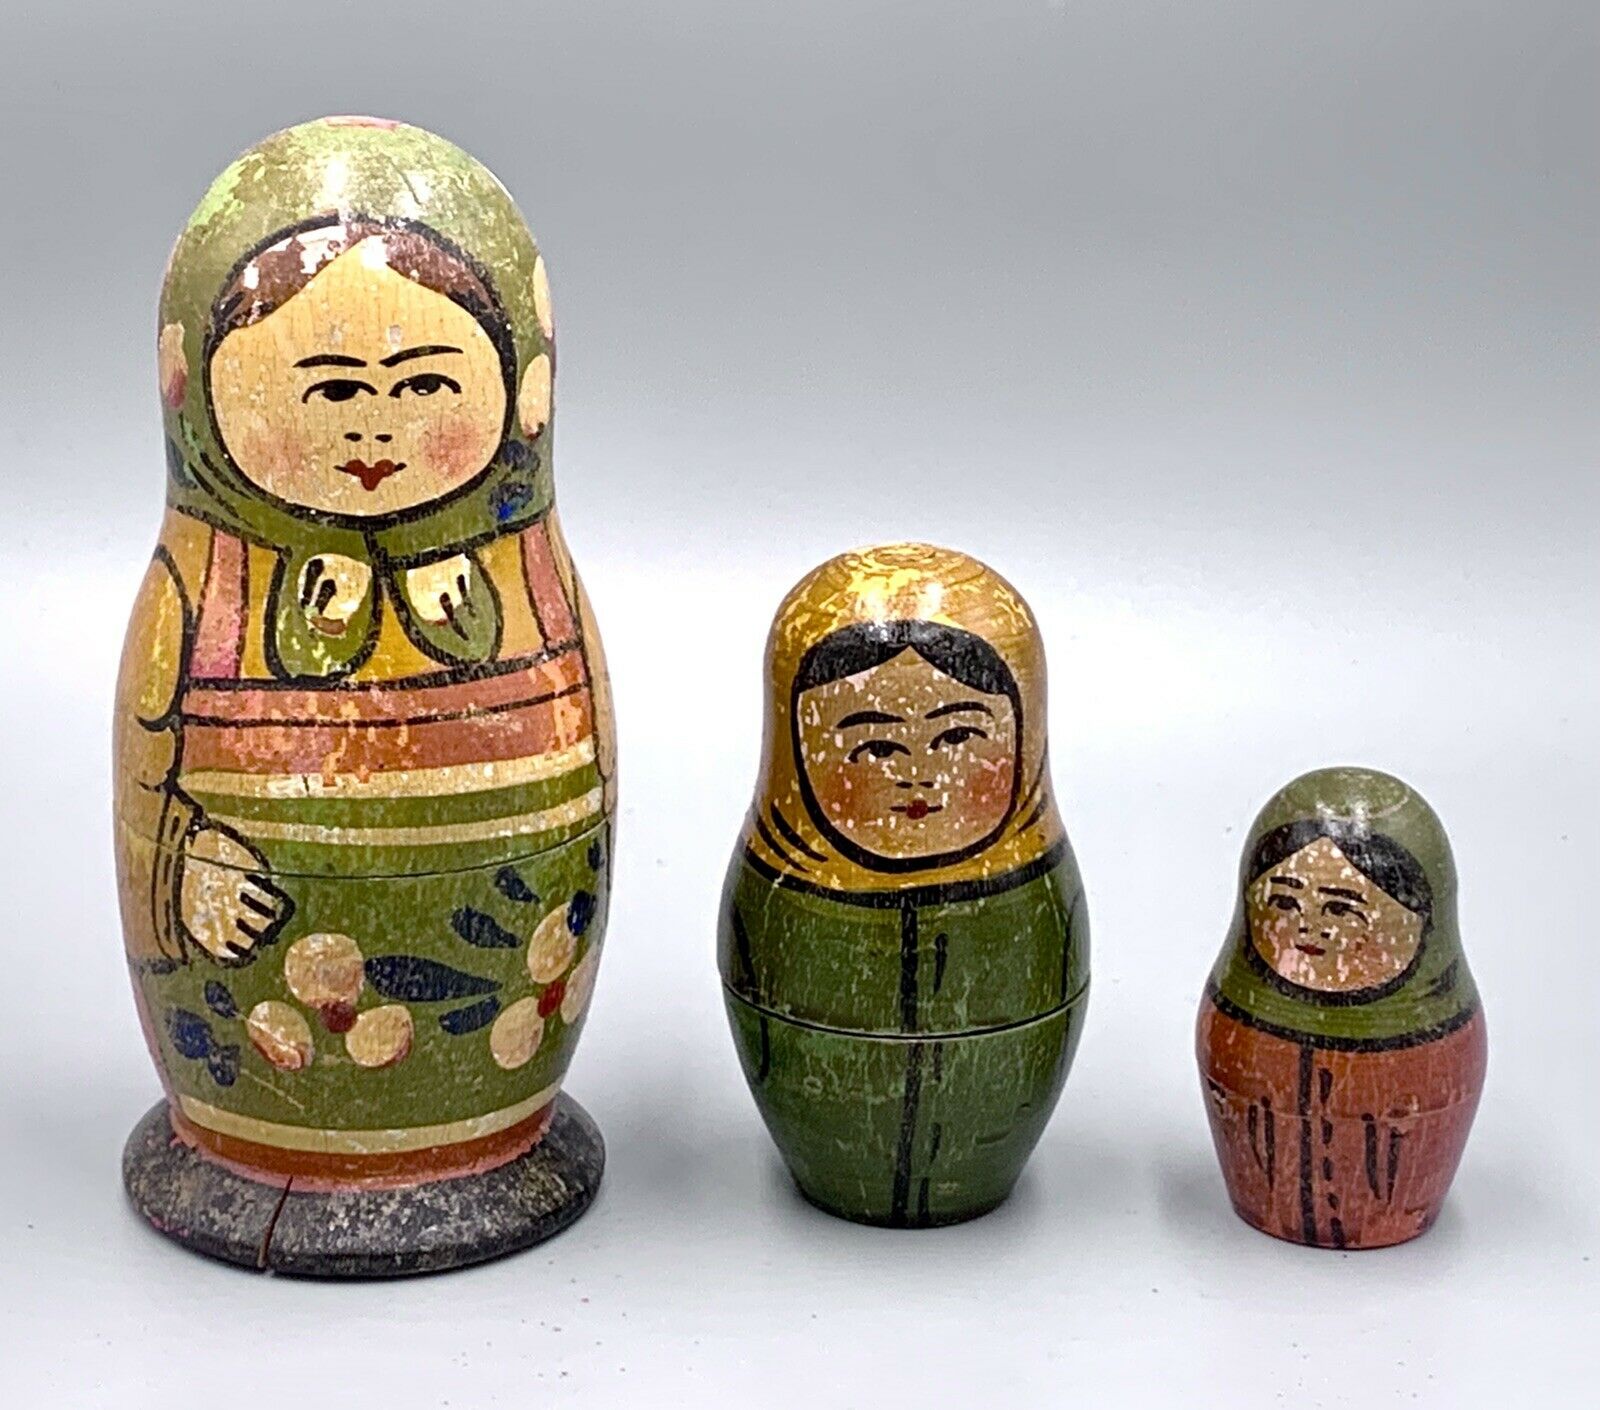 Unique Rare Vintage Russian Nesting Dolls 3 Hand Painted, Made In Soviet Union